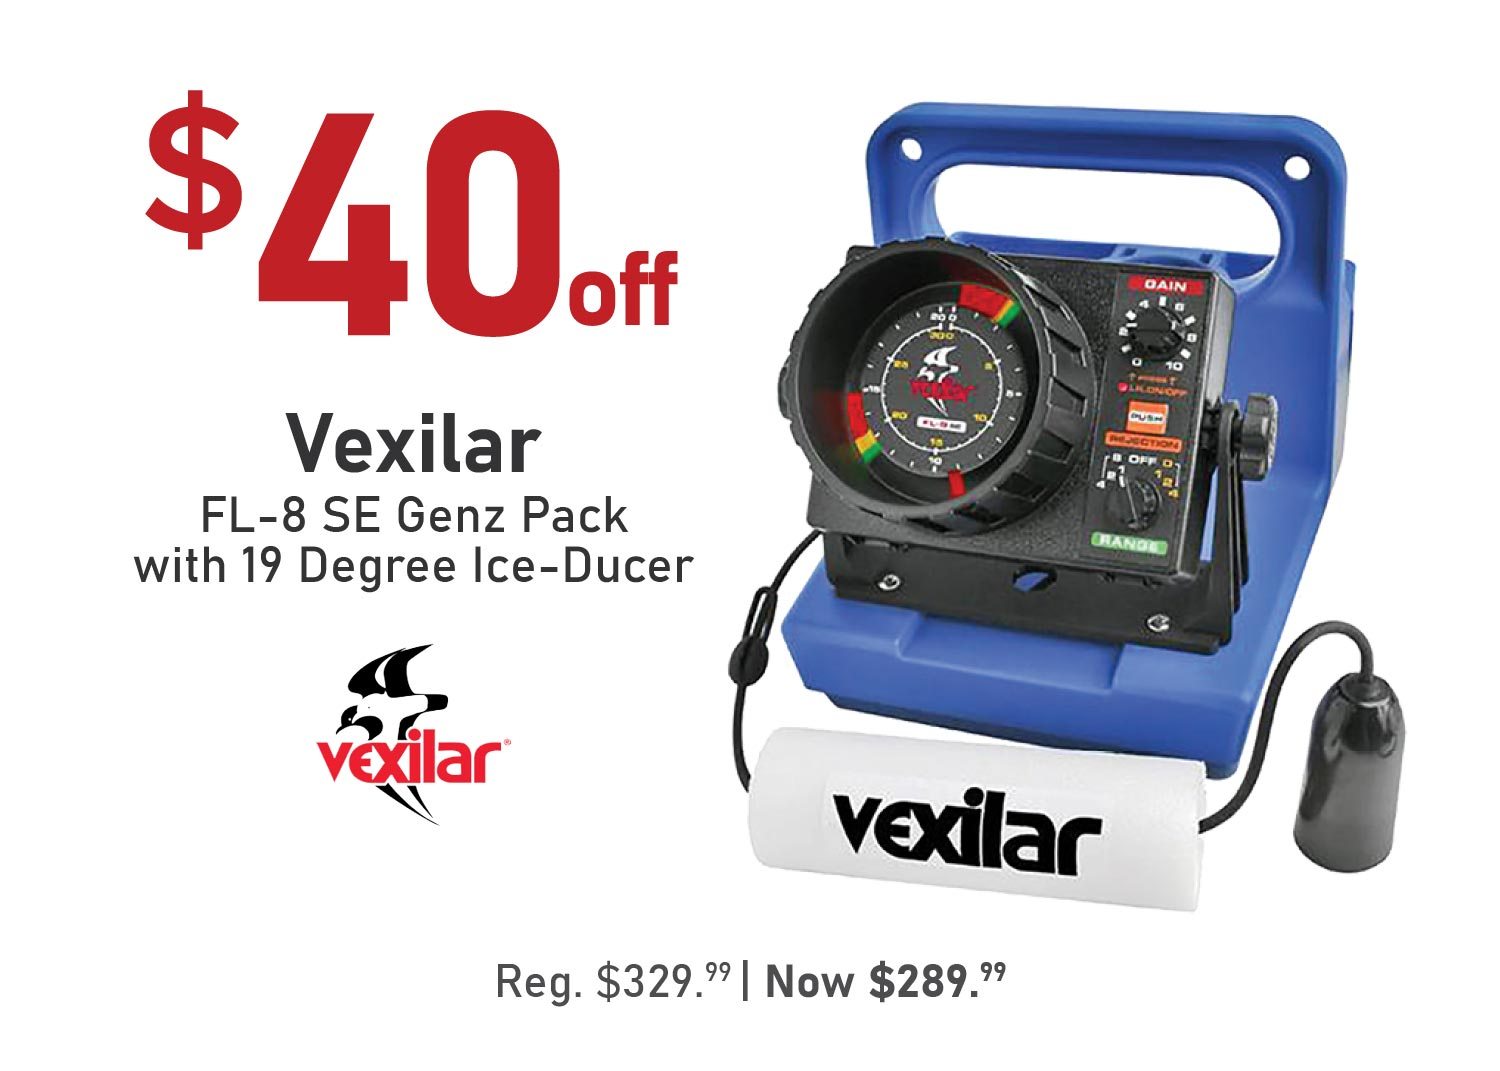 Vexilar FL-8 SE Genz Pack with 19 Degree Ice-Ducer $40 Off Reg. $329.99 | Now $289.99